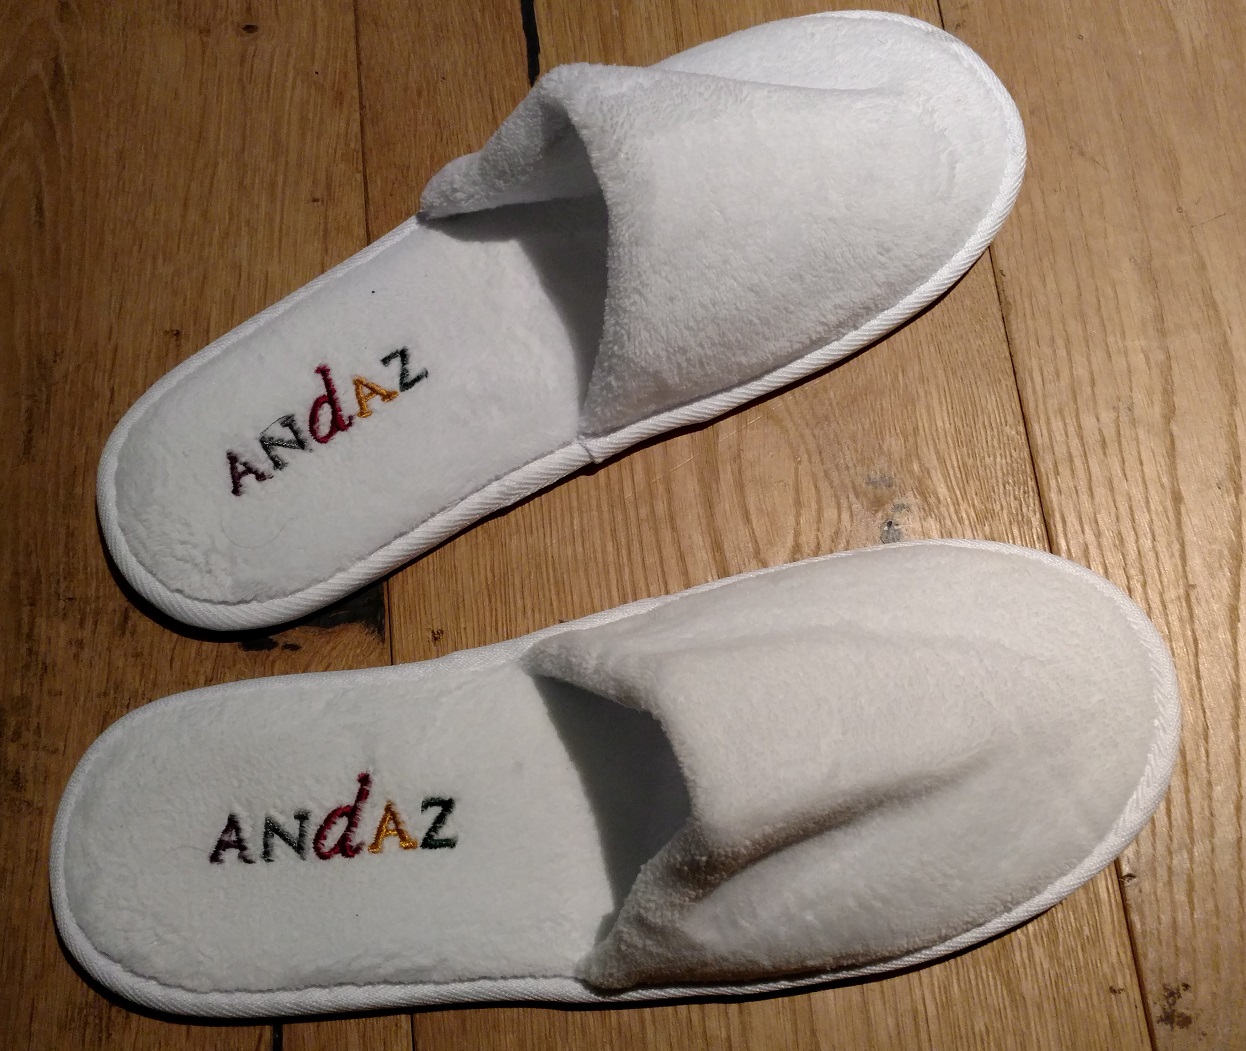 a pair of white slippers with text on them